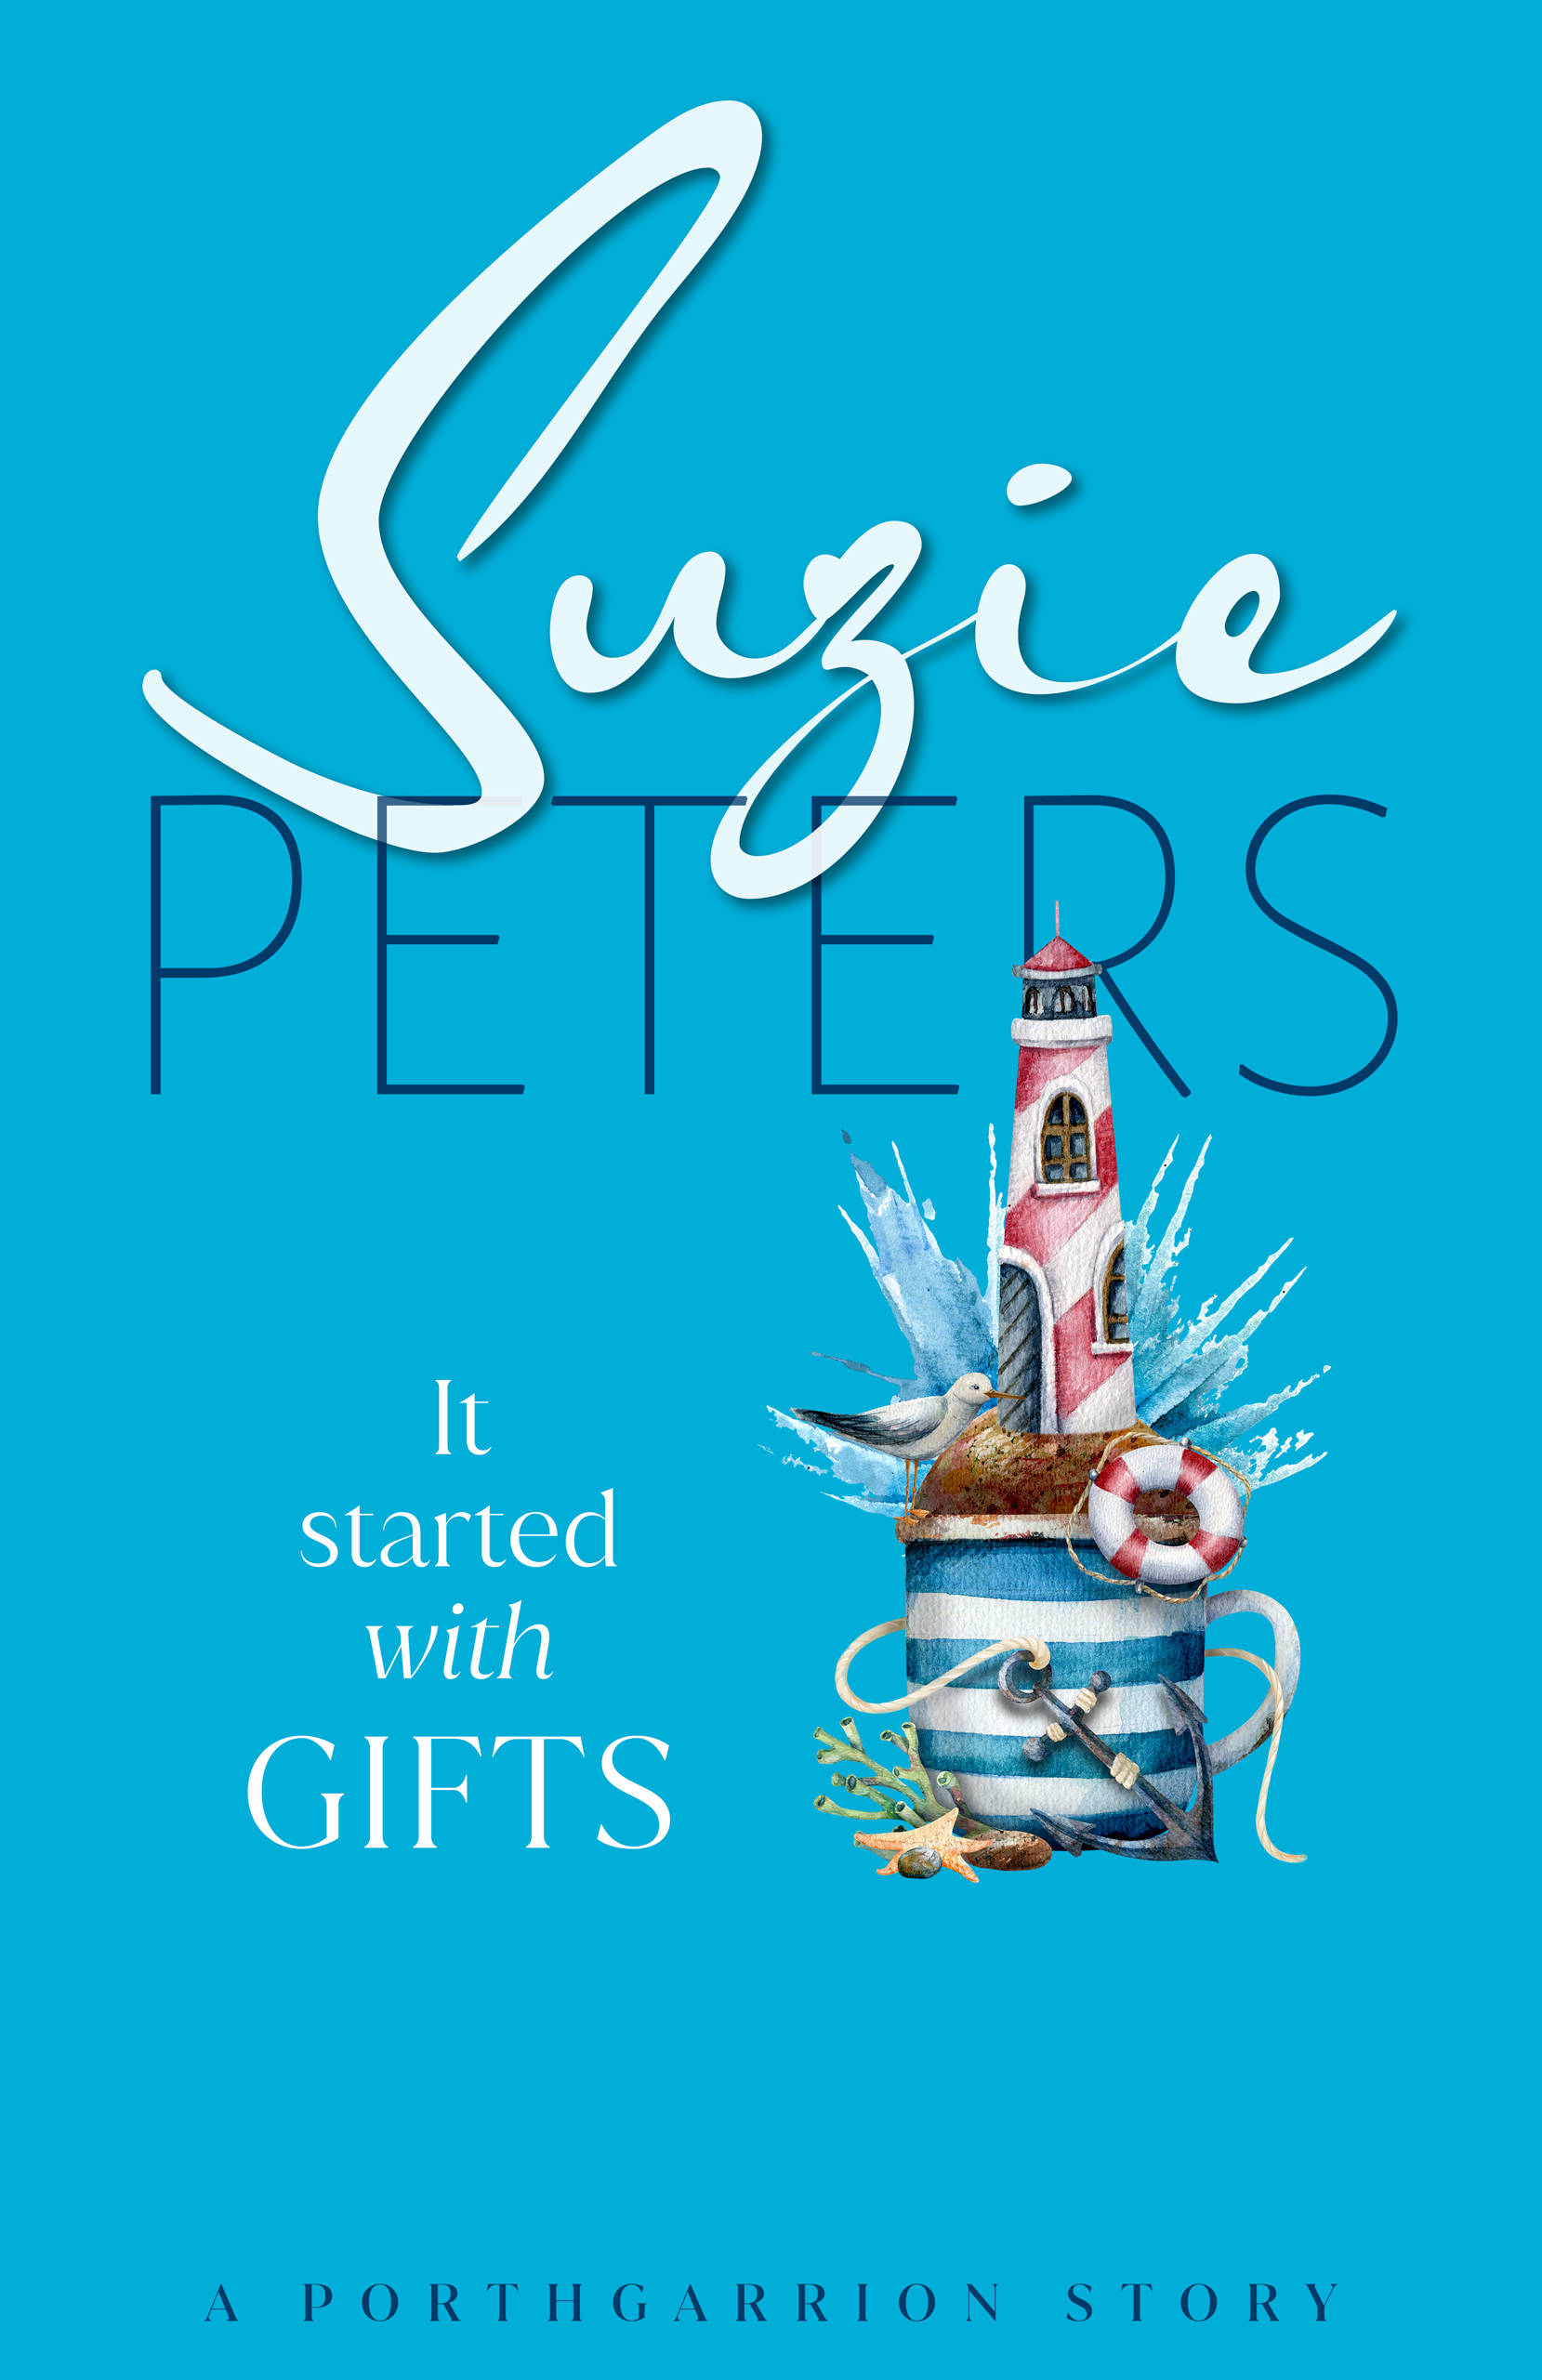 Porthgarrion Series: It Started with Gifts by Suzie Peters.